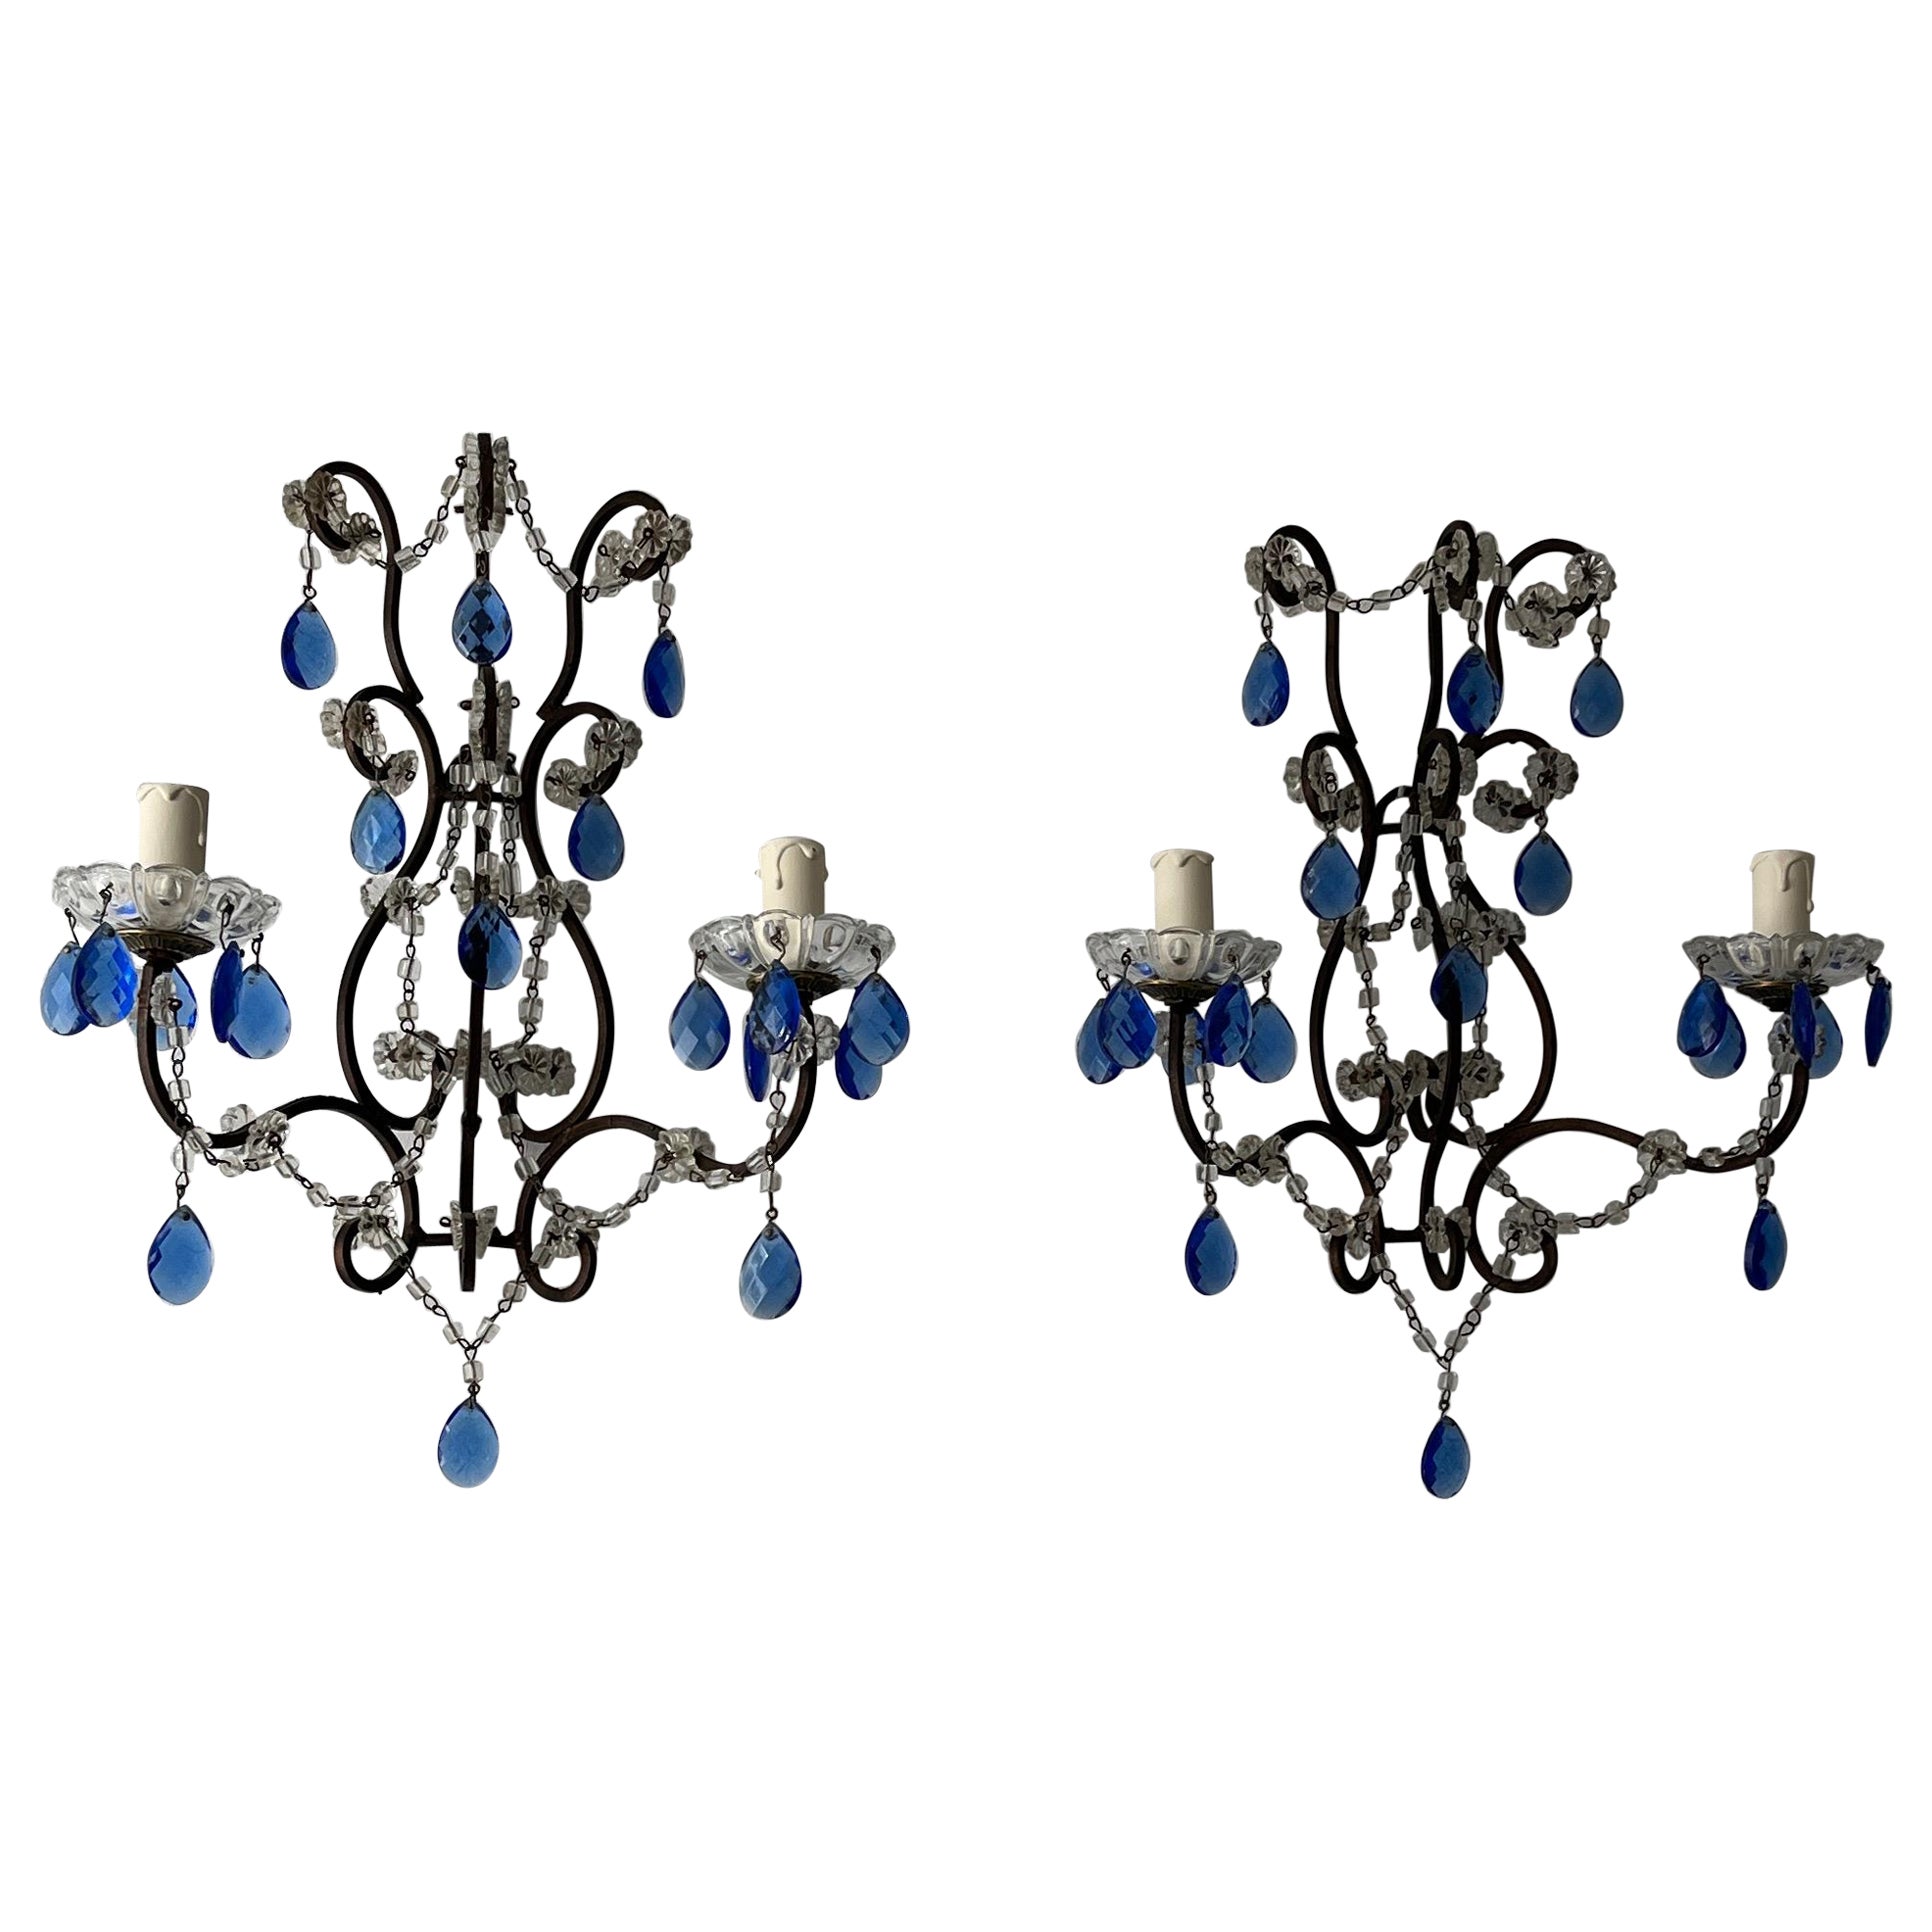 Beautiful French Cobalt Blue Prisms Macaroni Bead Swags Sconces c1920